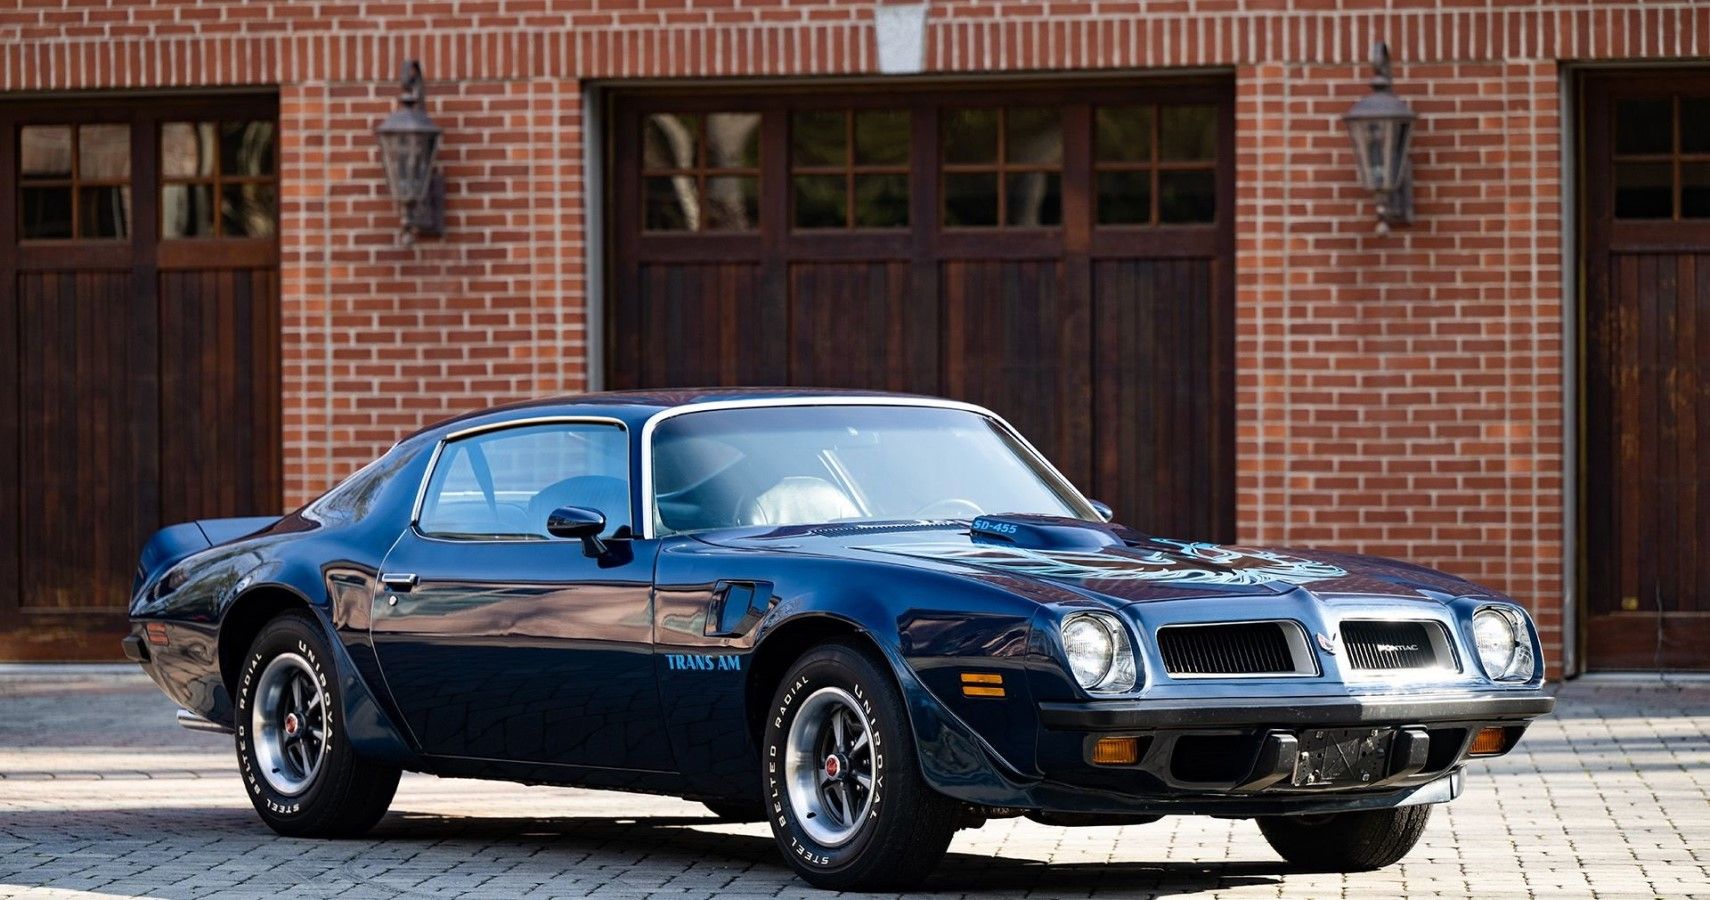 Why You Should Buy The 1970s Pontiac Firebird Trans Am Right Away